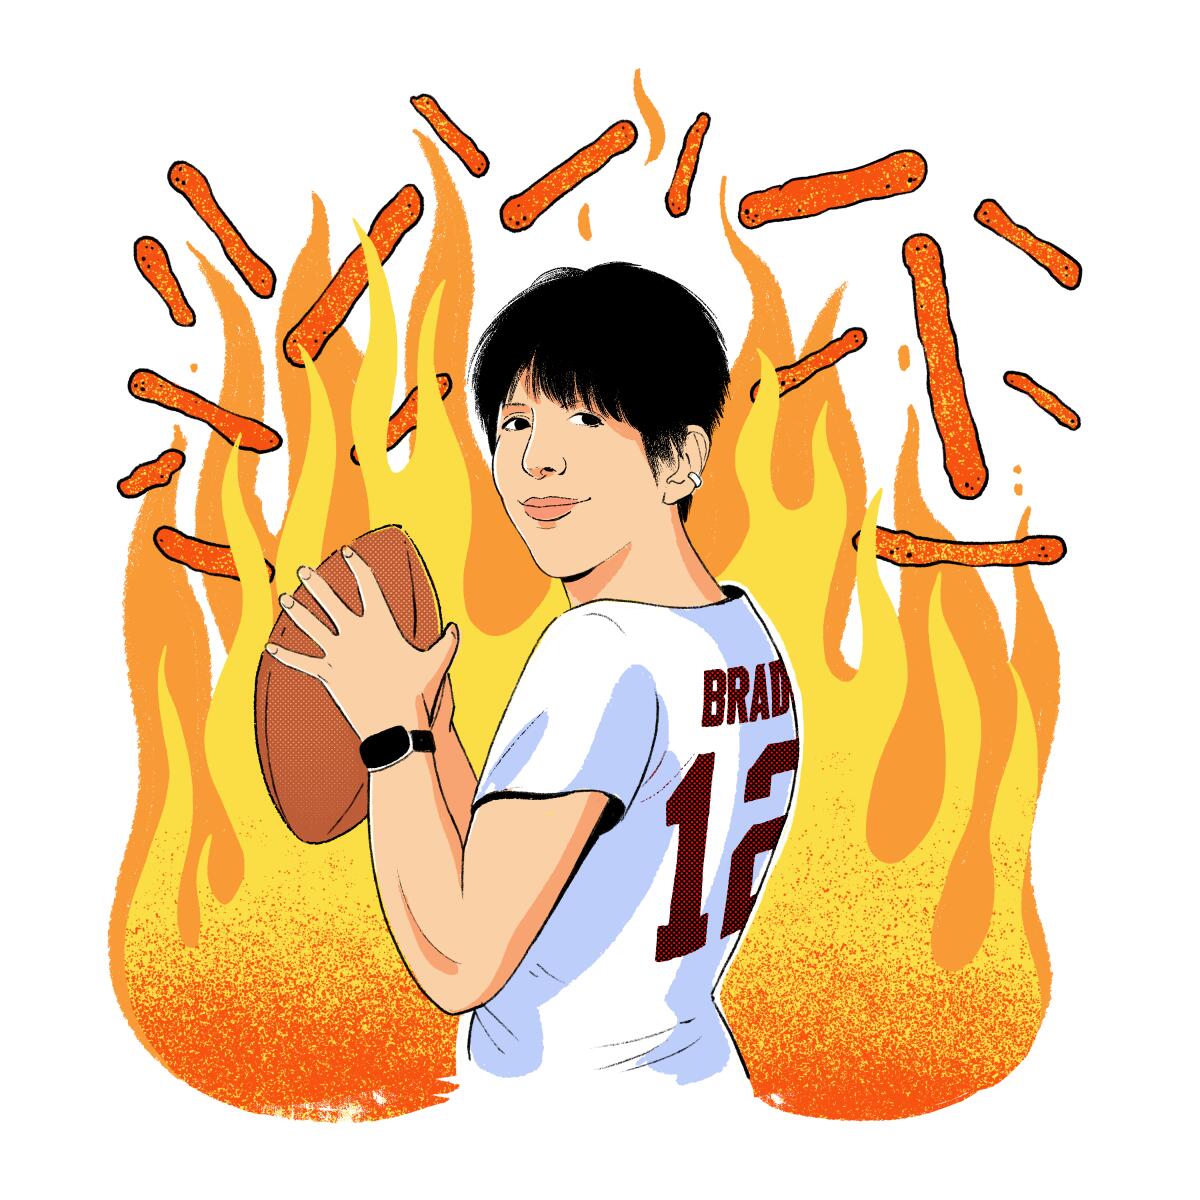 Illustration of Diane Warren holding a football with flames behind her.